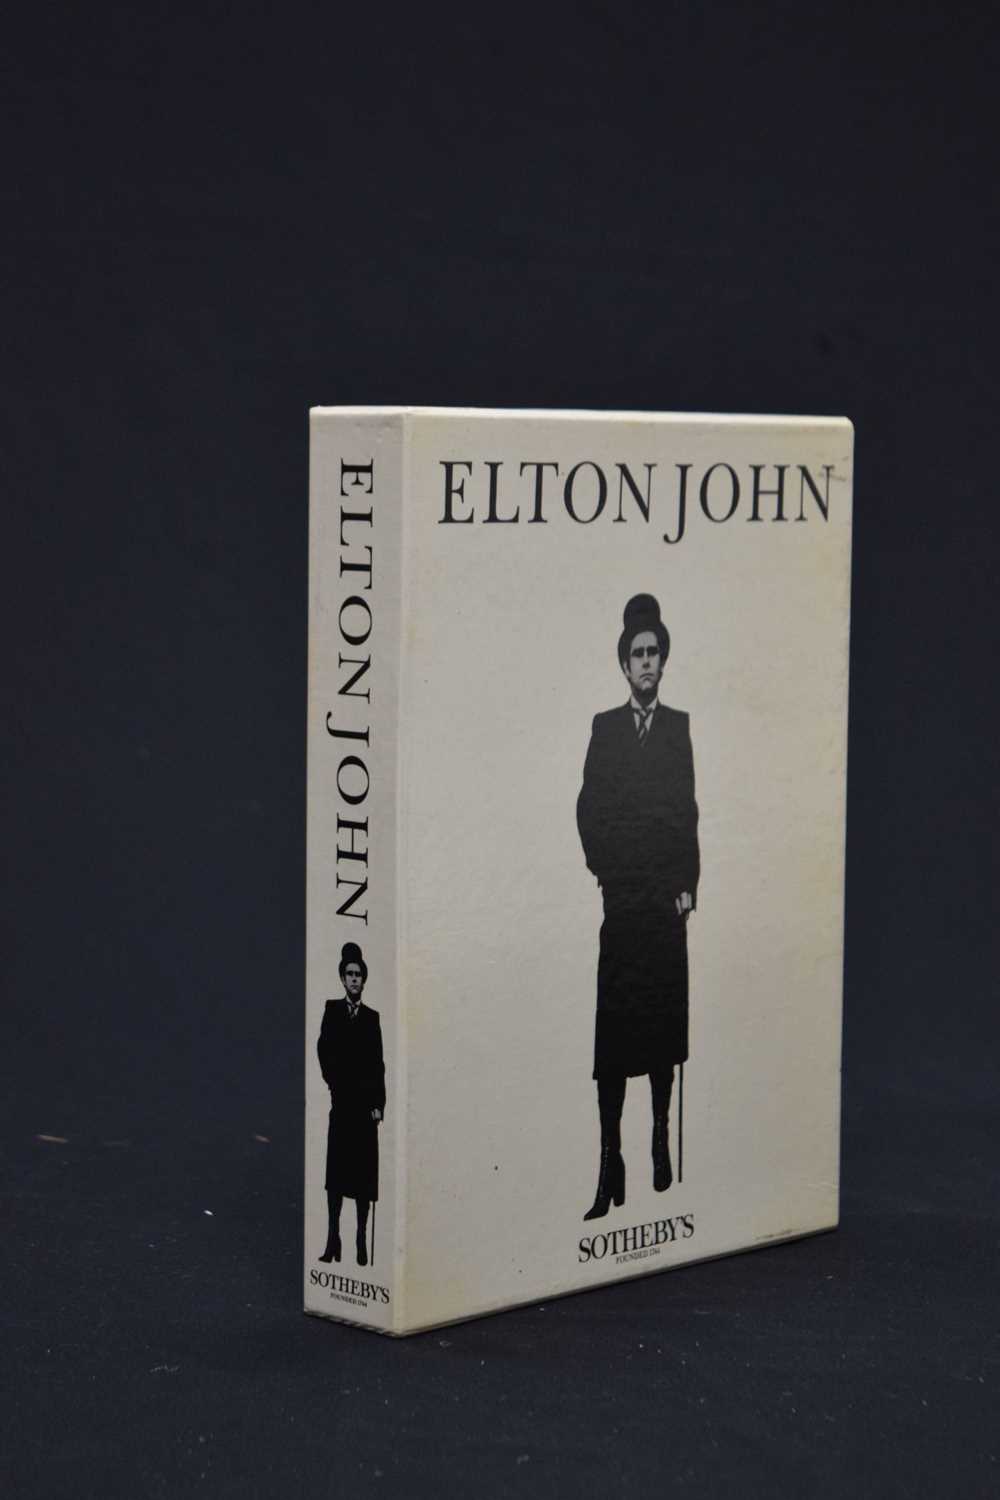 Sotheby's Elton John auction catalogue set from 6th-9th September 1988 - Image 2 of 9